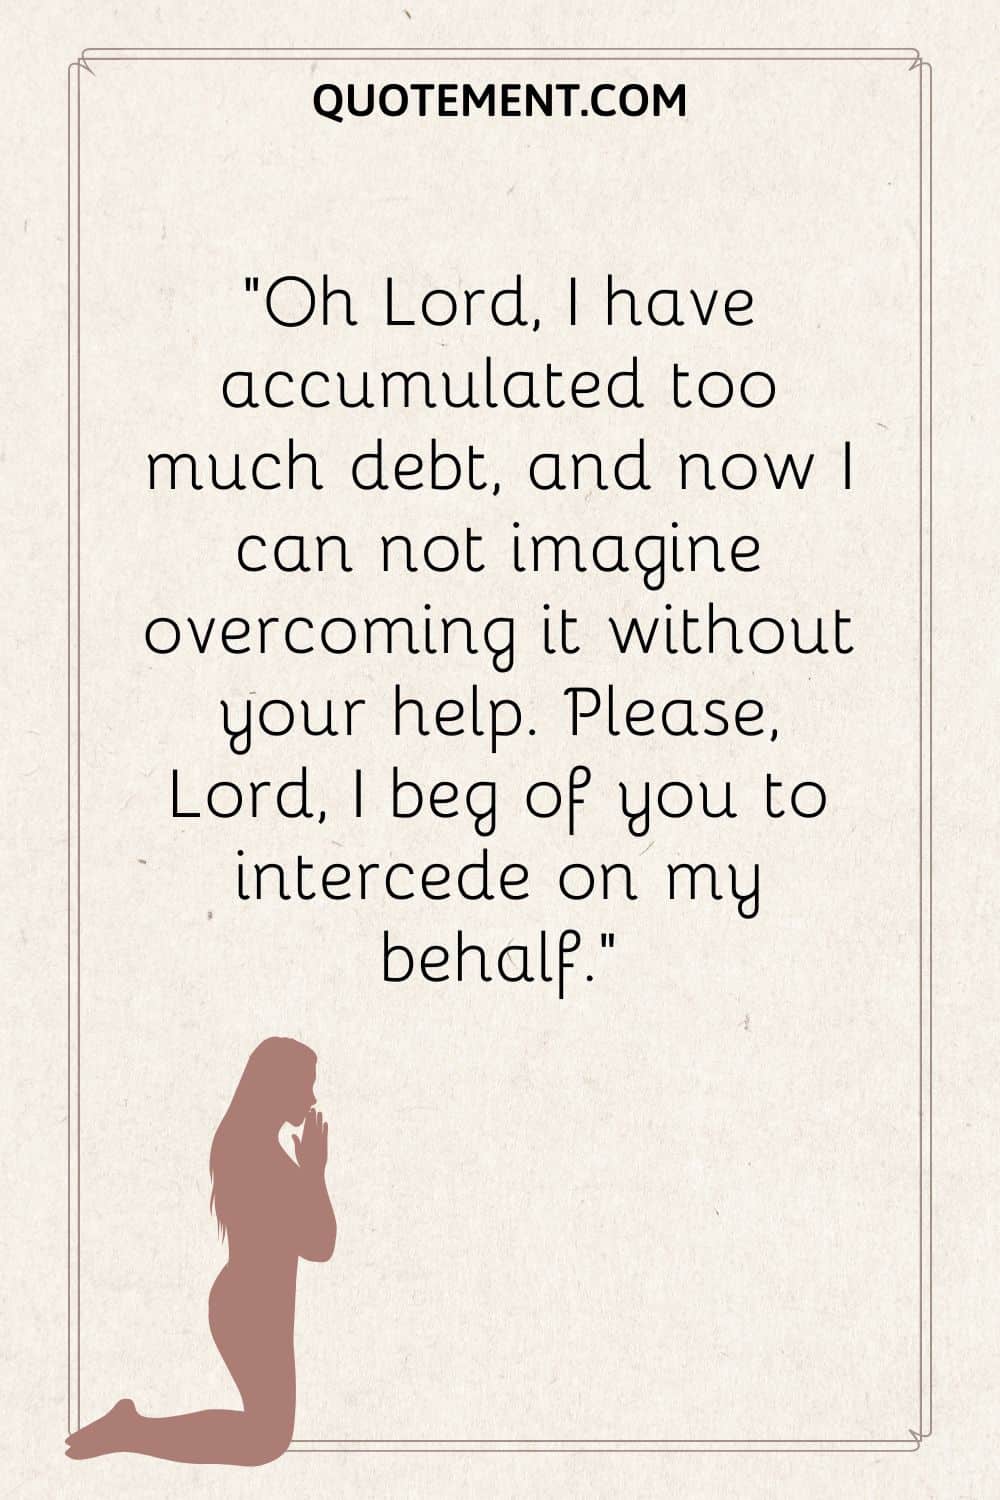 Oh Lord, I have accumulated too much debt, and now I can not imagine overcoming it without your help